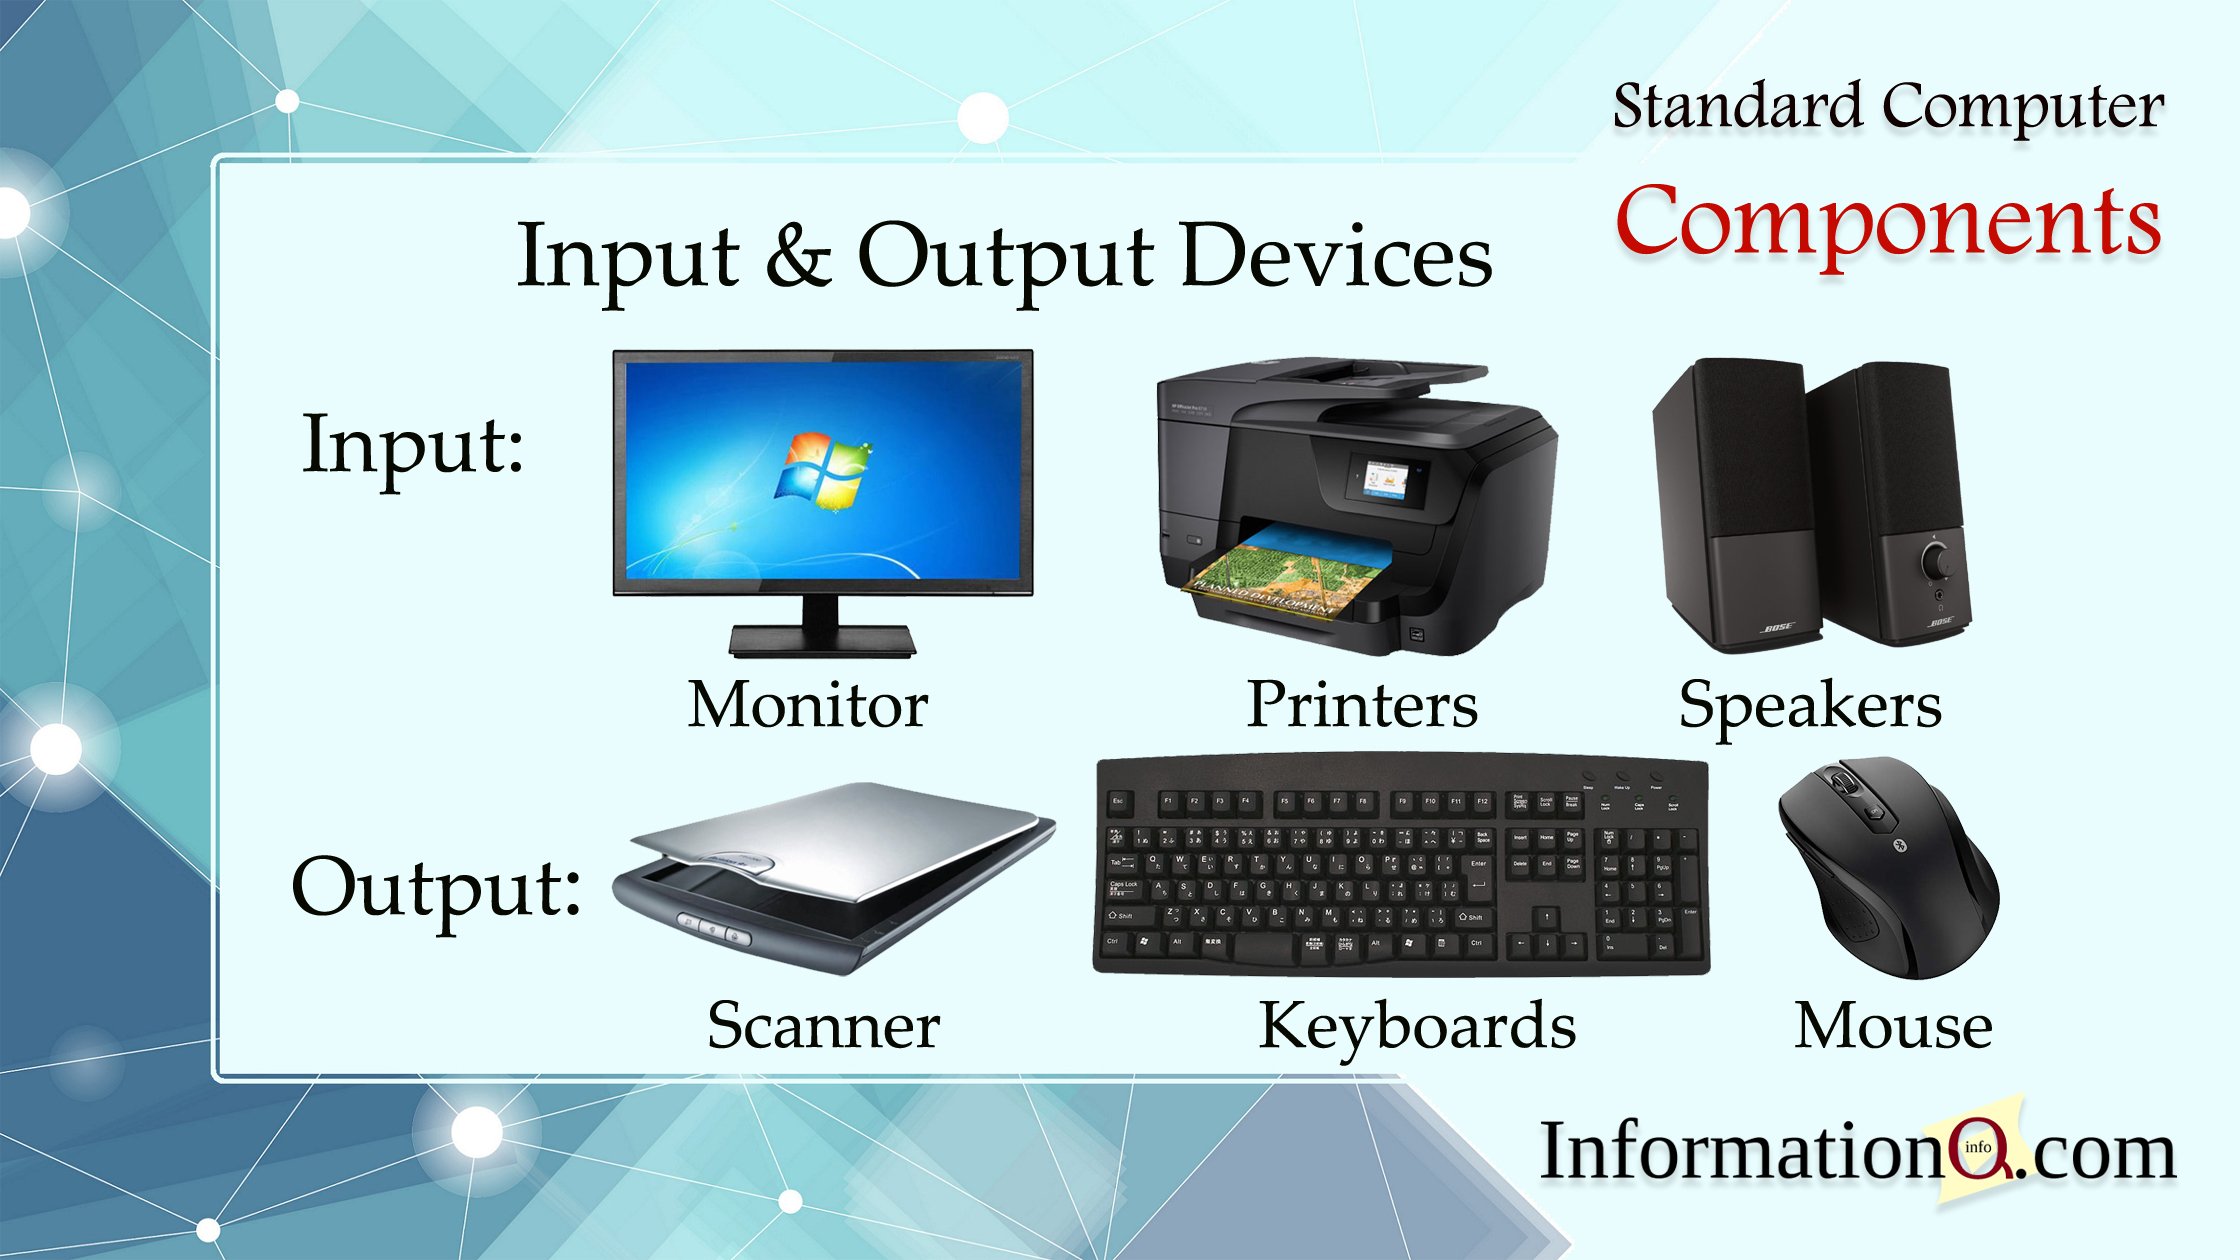 Input output devices. Computer components. Computer devices слайд. Компьютеры Computer Parts. Input devices of Computer.